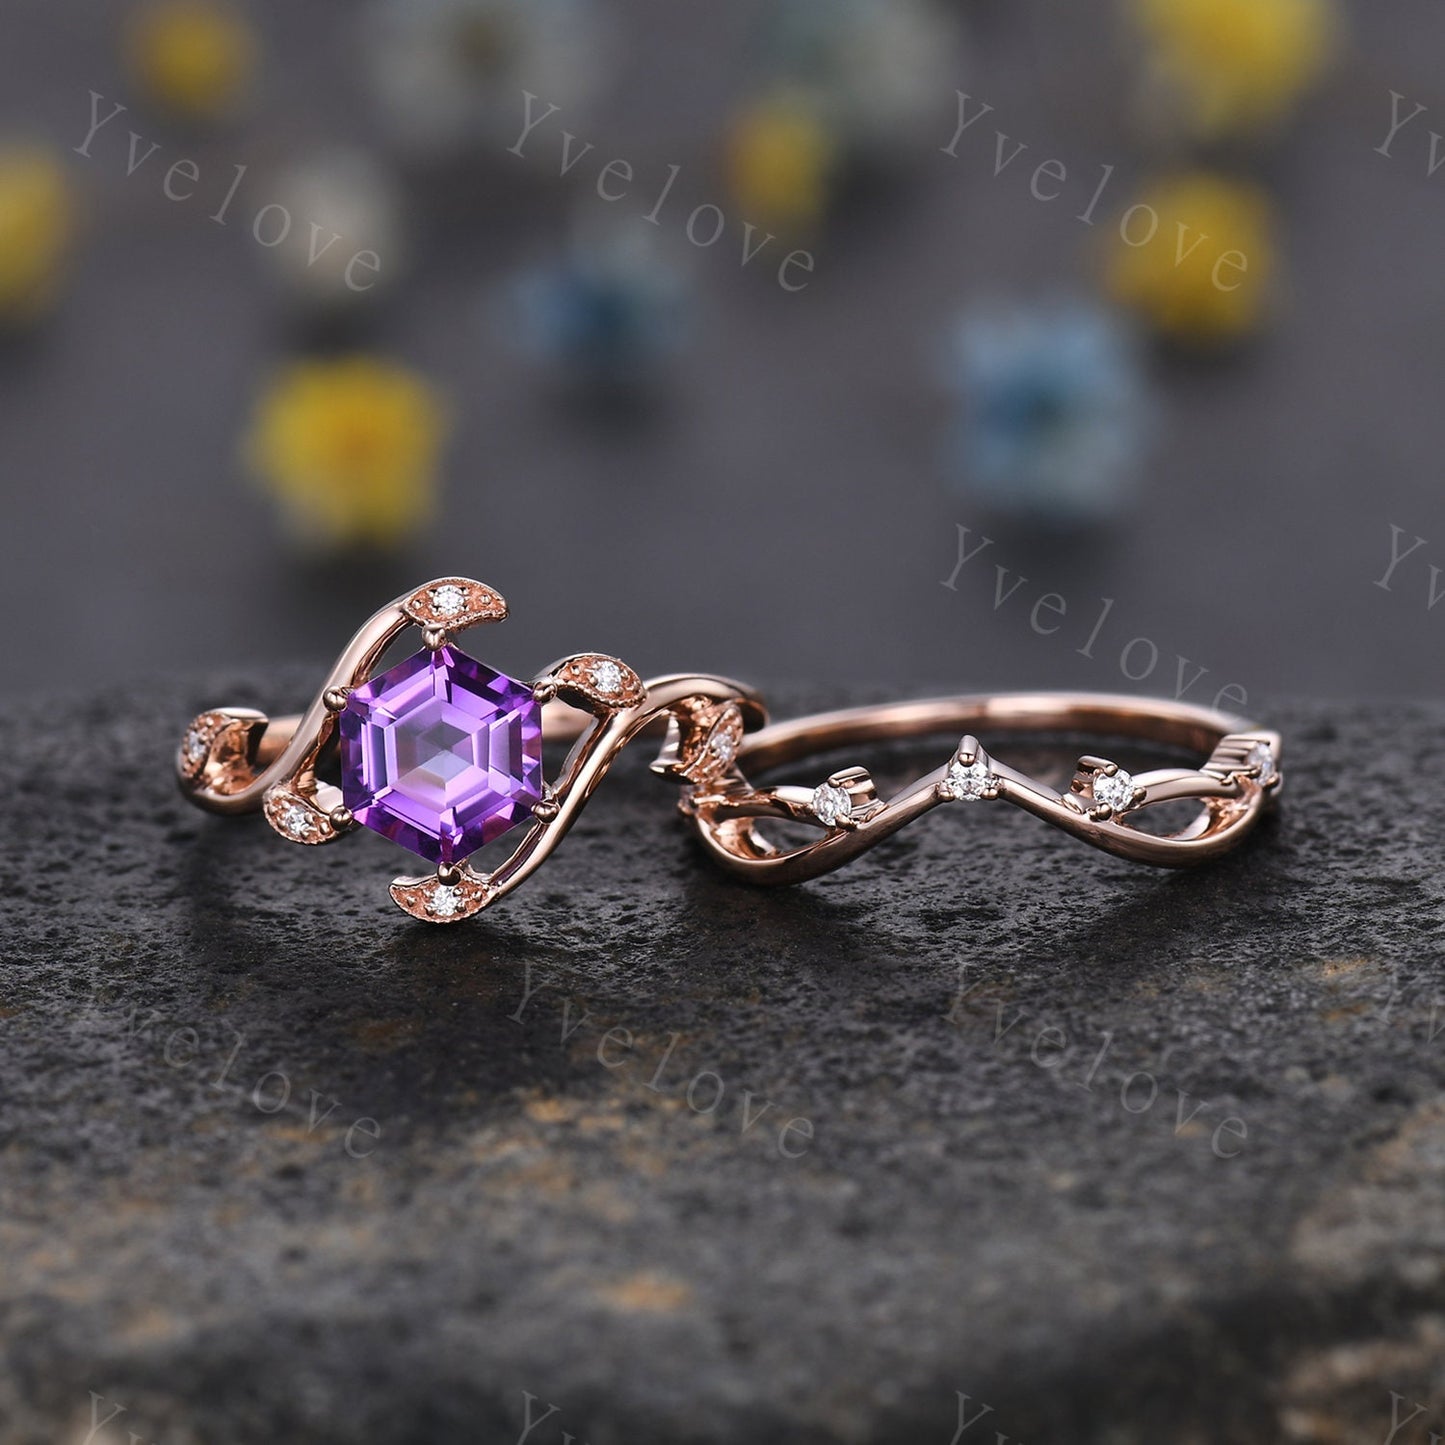 Retro hexagon Amethyst Ring,Vintage rose gold Ring Set,Unique Amethyst Engagement Ring,Promise Ring,Bridal Ring Set February Ring Mom Gift